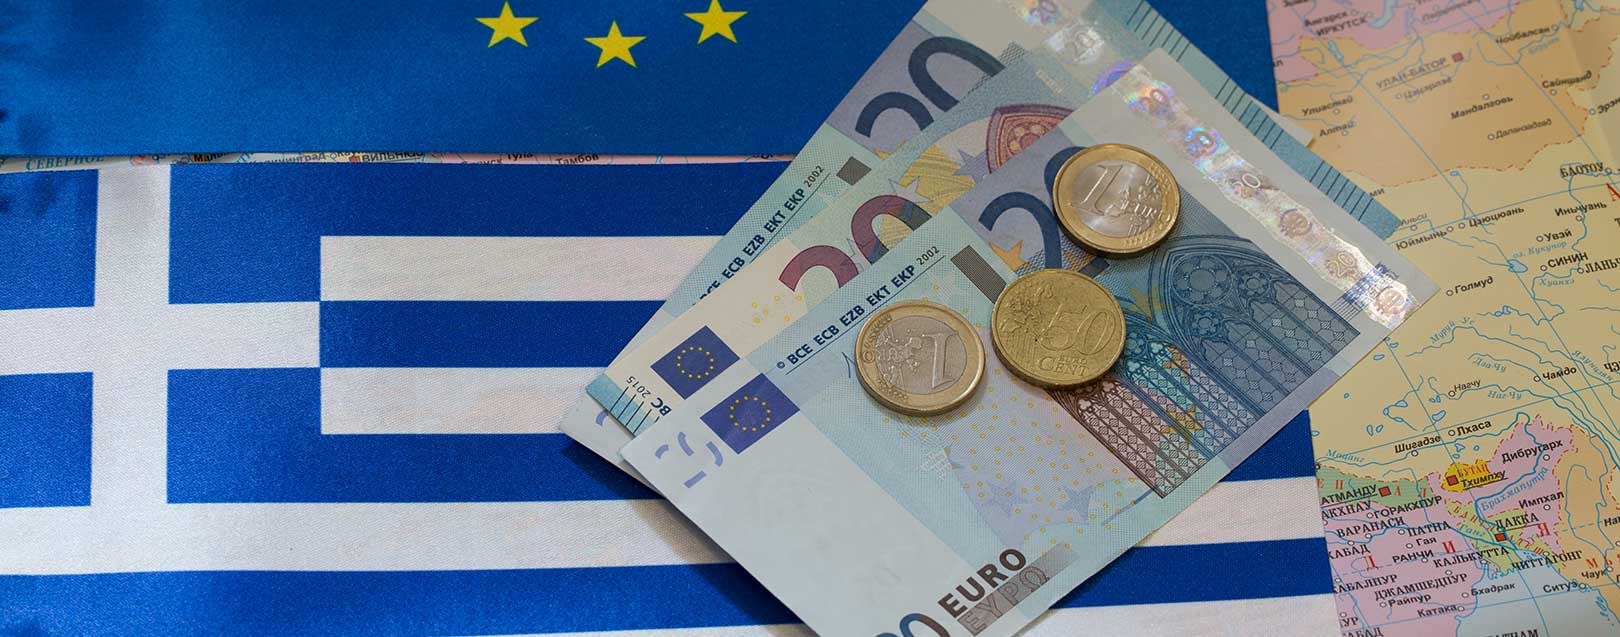 Stalemated bailout negotiations: Greece's future hangs in balance